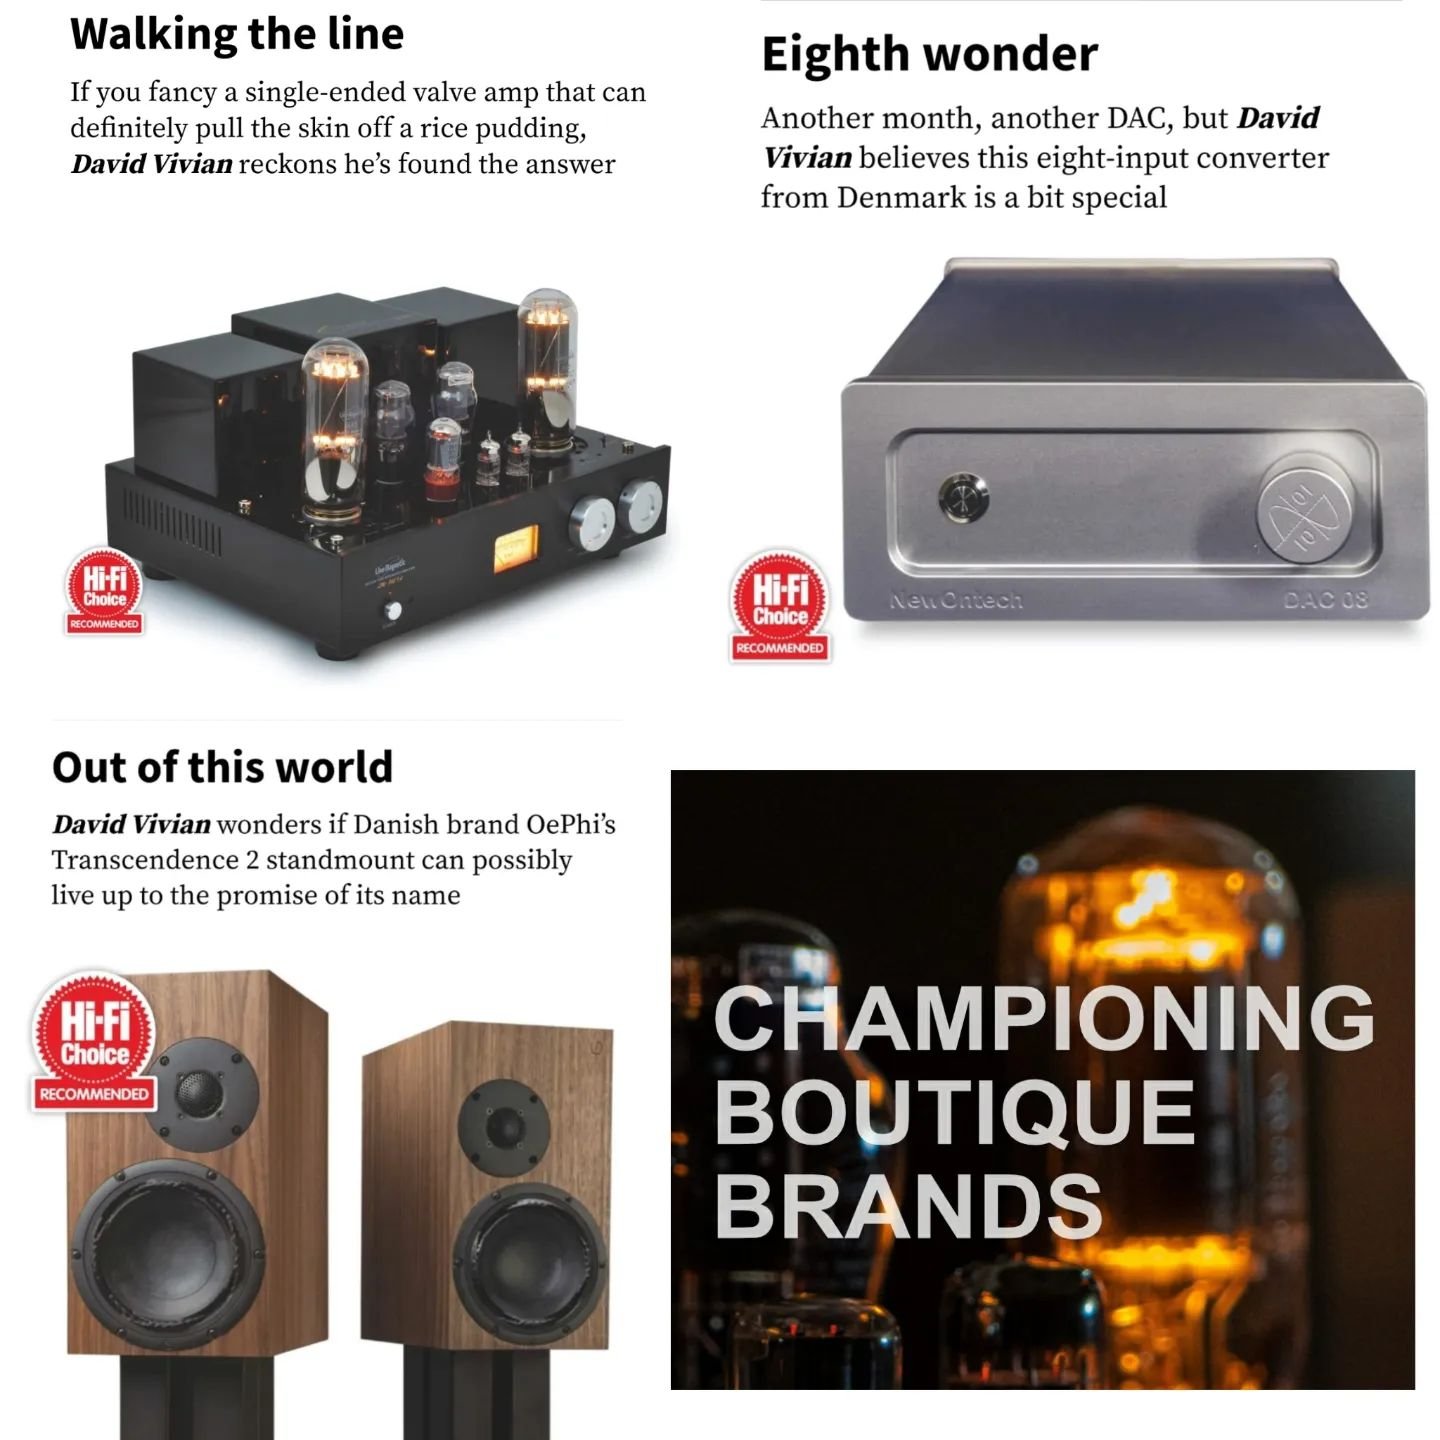 We've championed the very best boutique HiFi brands since we started and the three recent reviews we've organised are the epitome of our ethos. Thanks to HiFi Choice and reviewer David Vivian for feeling the same about these brilliant giant killers.
